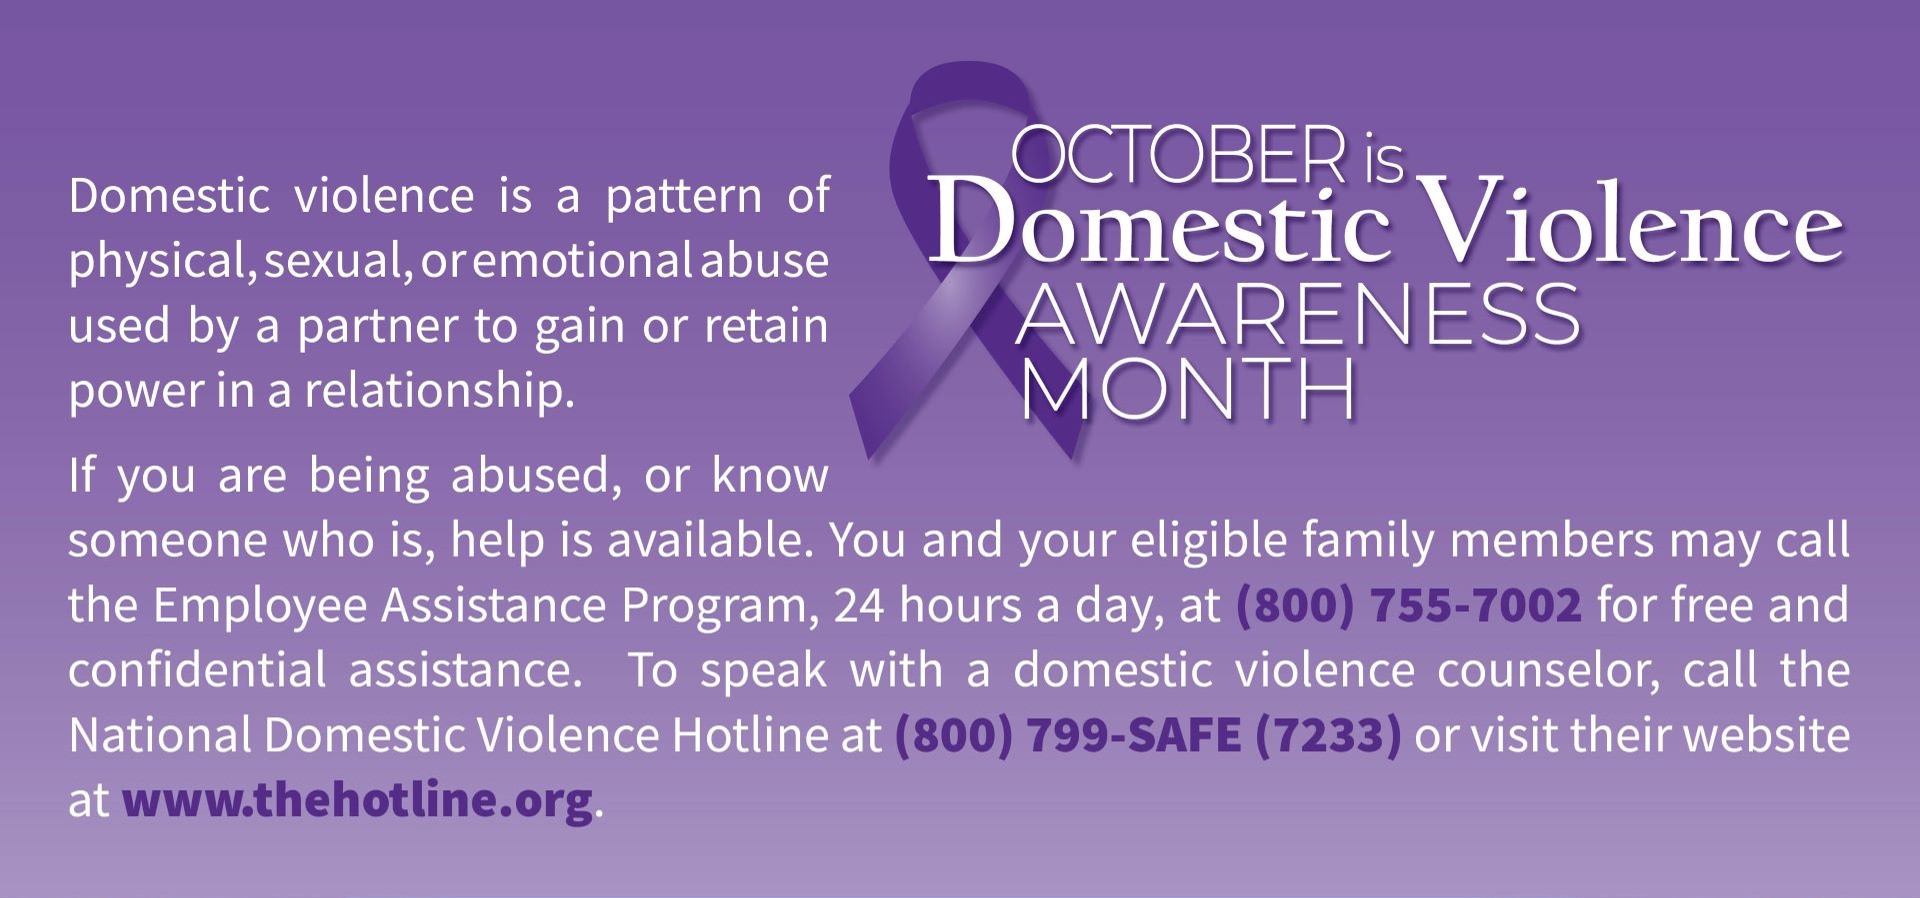 Domestic violence, or intimate partner violence, is a pattern of physical, sexual, or emotional abuse used by a partner to gain or retain power in a relationship and is a risk factor for suicide.  If you are being abused, or know someone who is, call the National Domestic Violence Hotline at 800-799-SAFE (7233) or visit www.thehotline.org.